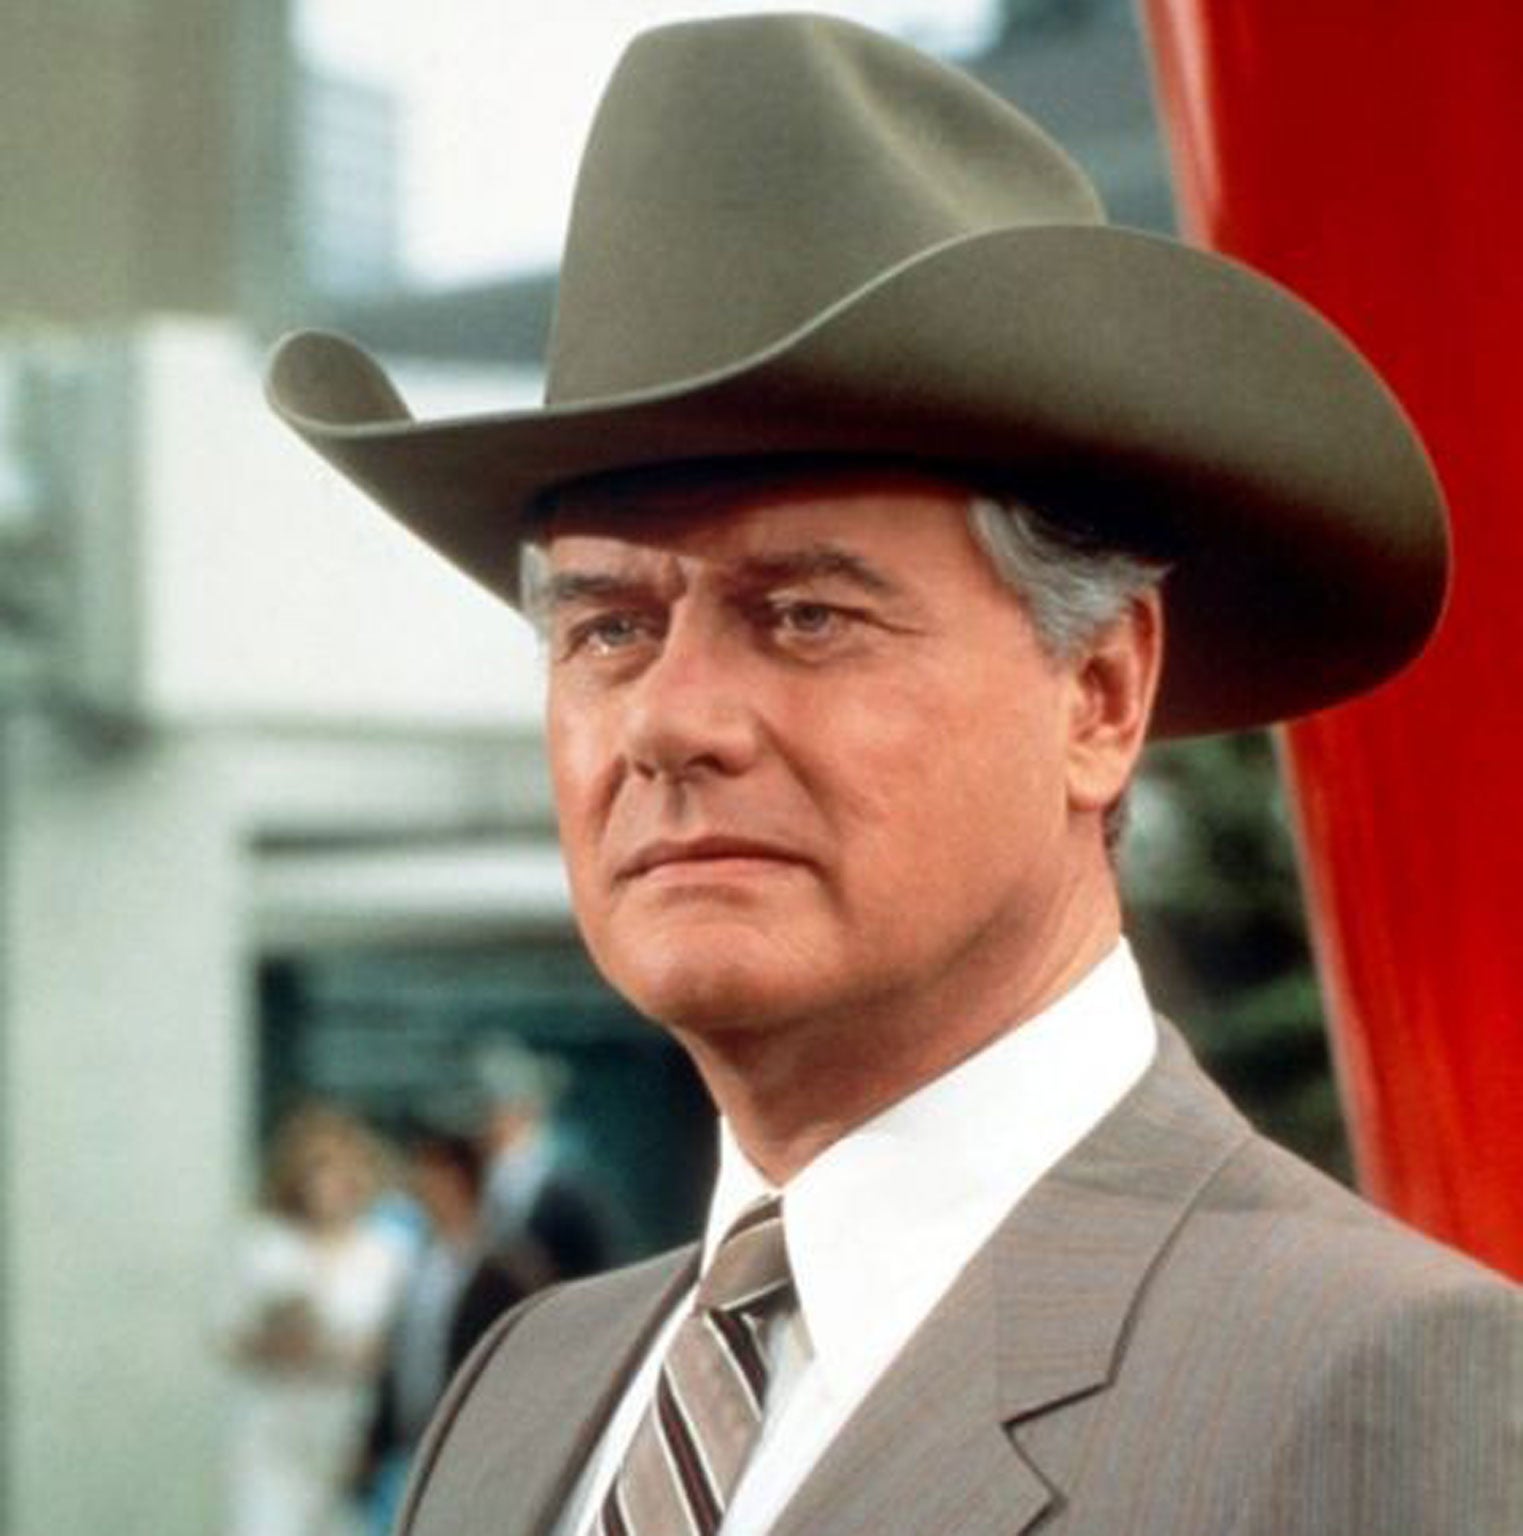 Stetson and an evil streak: Hagman as JR in ‘Dallas’; it eventually ran to 356 episodes over 13 years